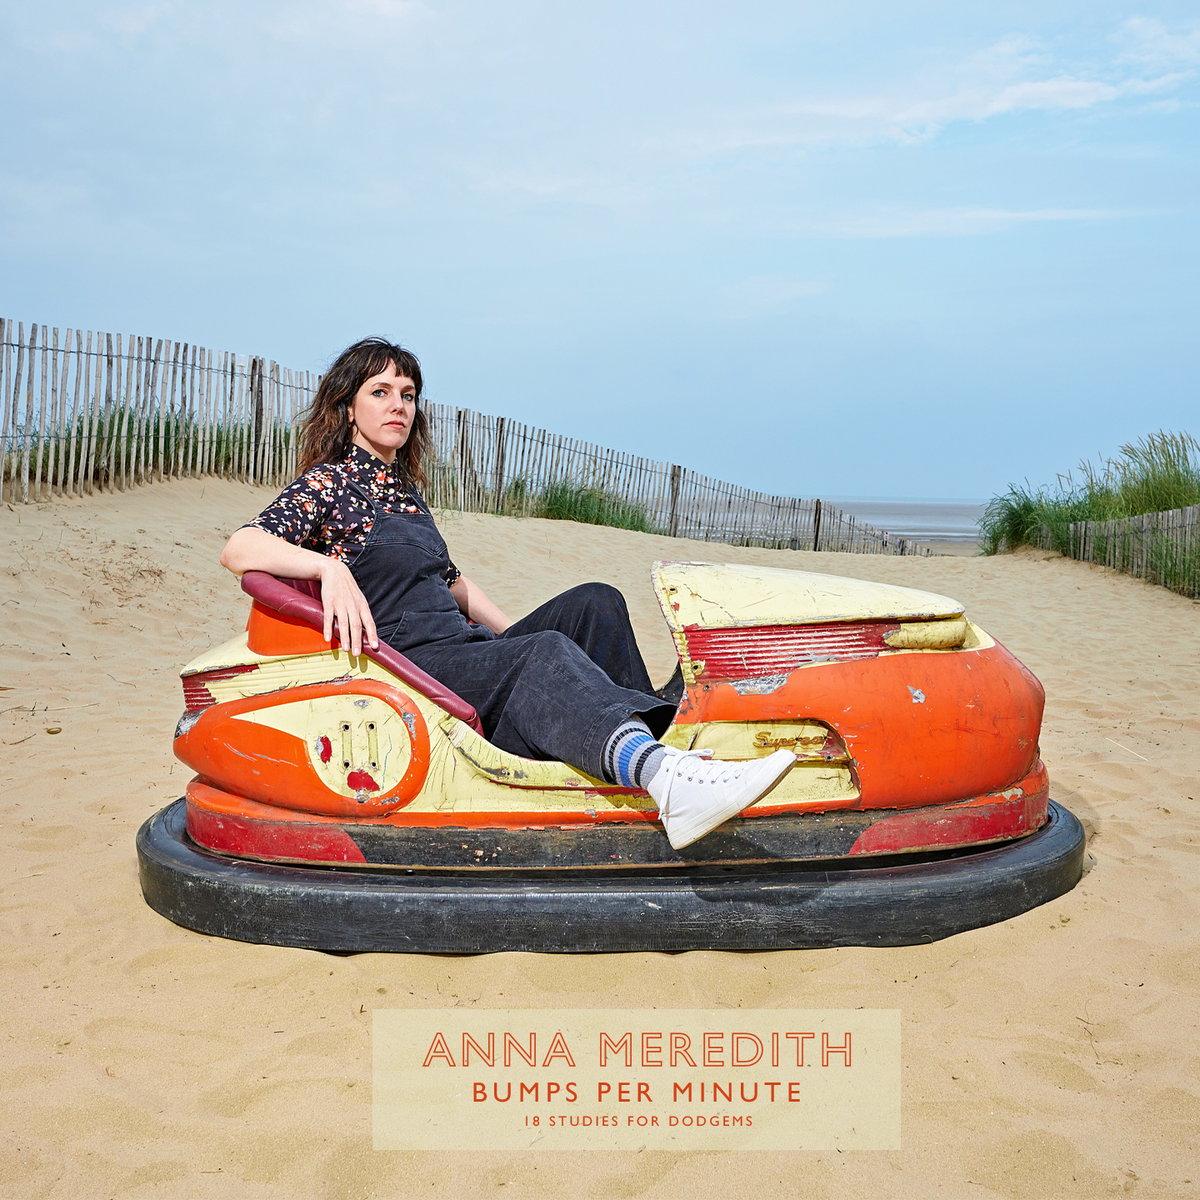 RECORD OF THE MONTH//Anna Meredith – Bumps Per Minute: 18 Studies For Dodgems